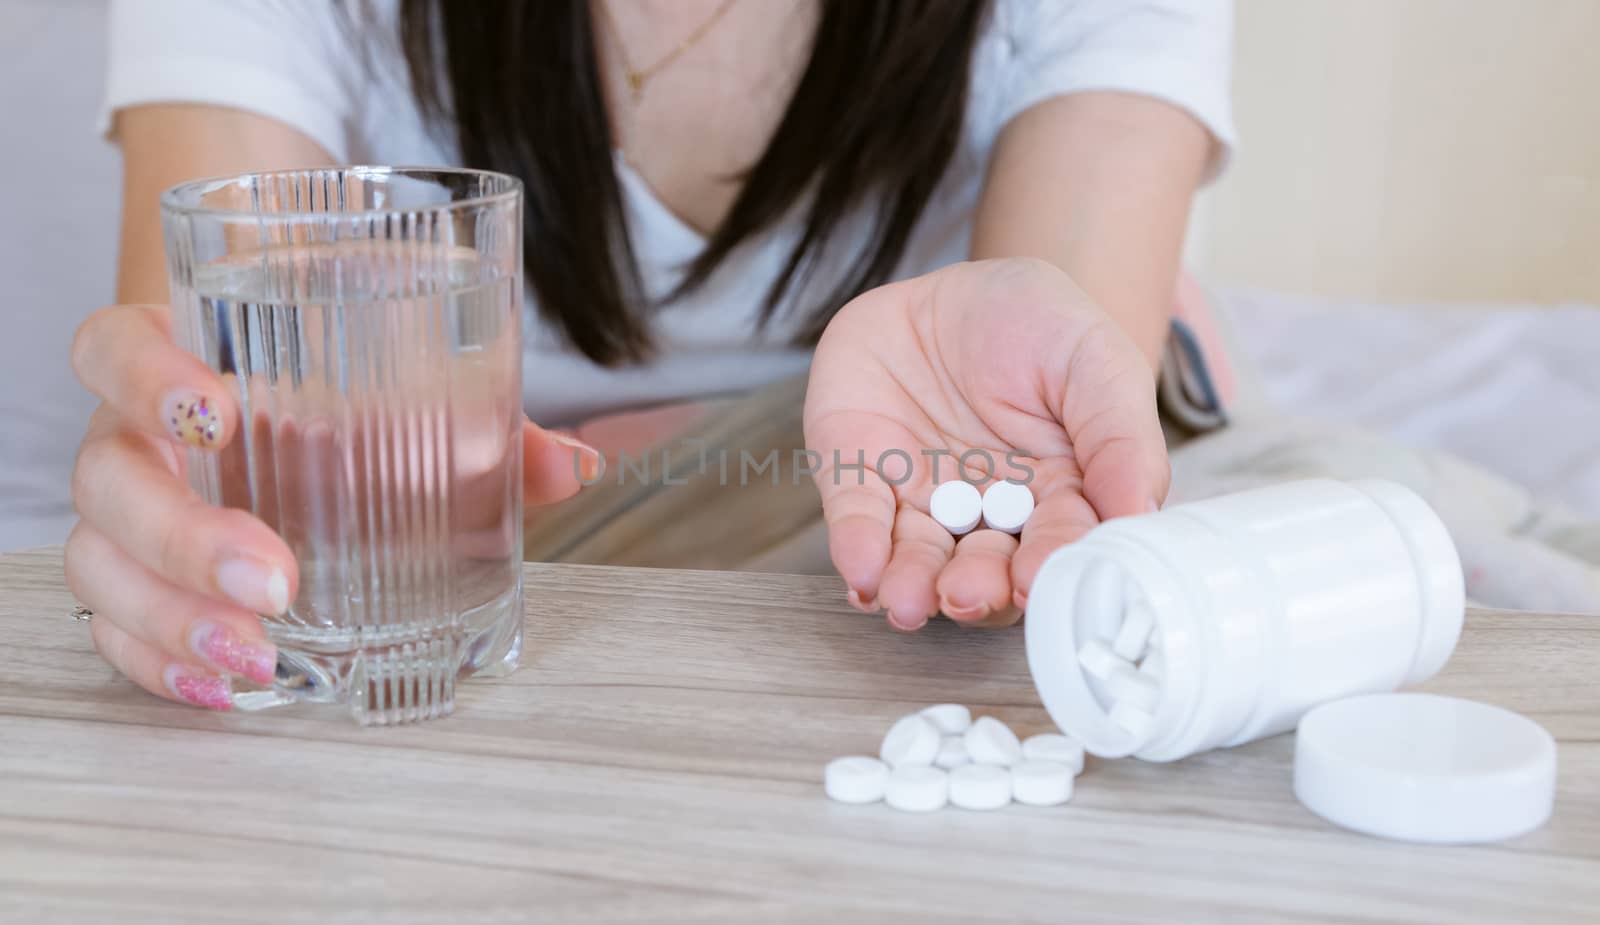 Flu medicine woman Infected With Cold the drug is placed on the table and a glass of water.